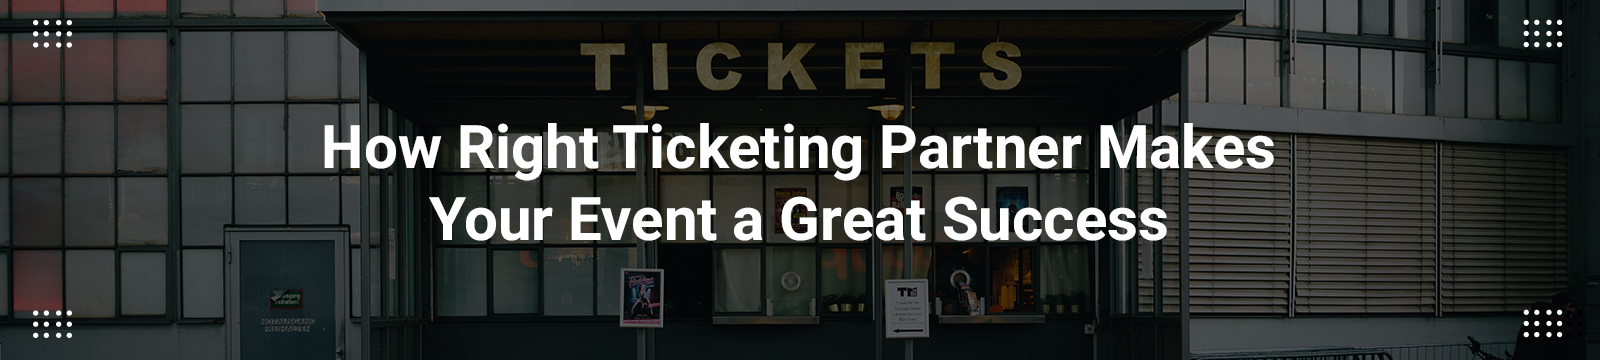 How Right Ticketing Partner Makes Your Event a Great Success